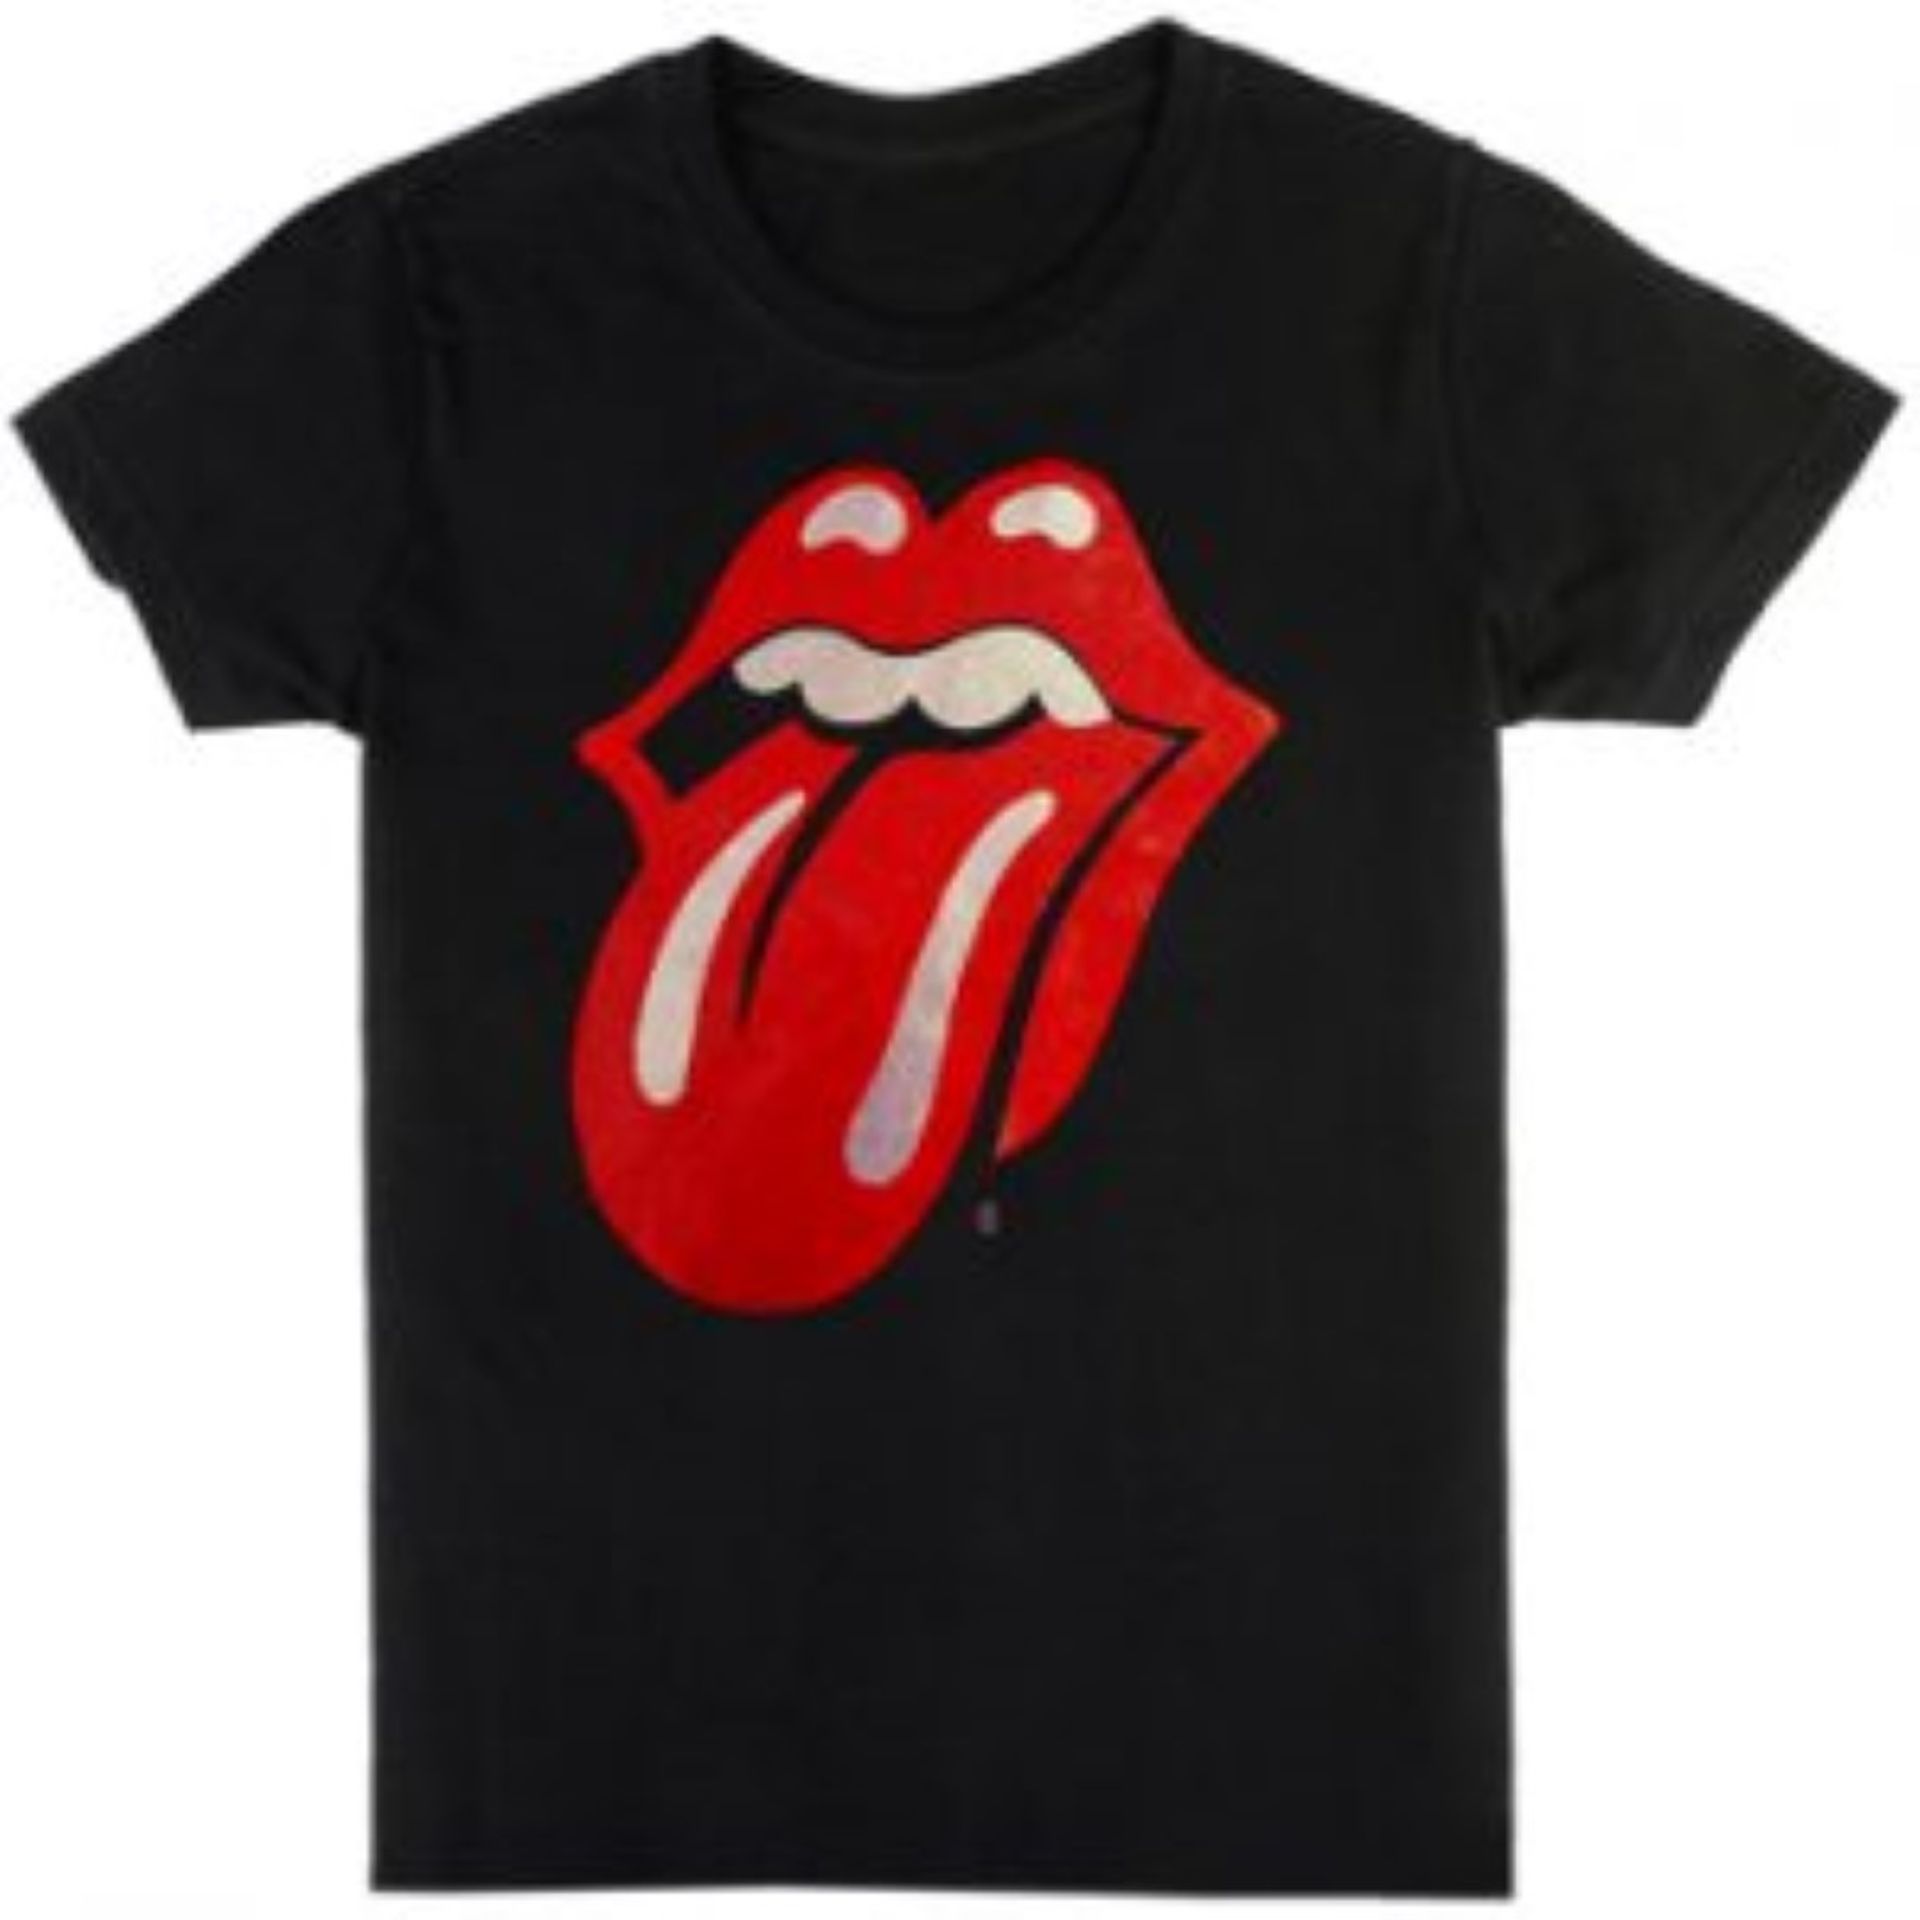 3 x THE ROLLING STONES Various Designs Short and Long Sleeve T-Shirts - Size: Large - Officially - Image 3 of 7